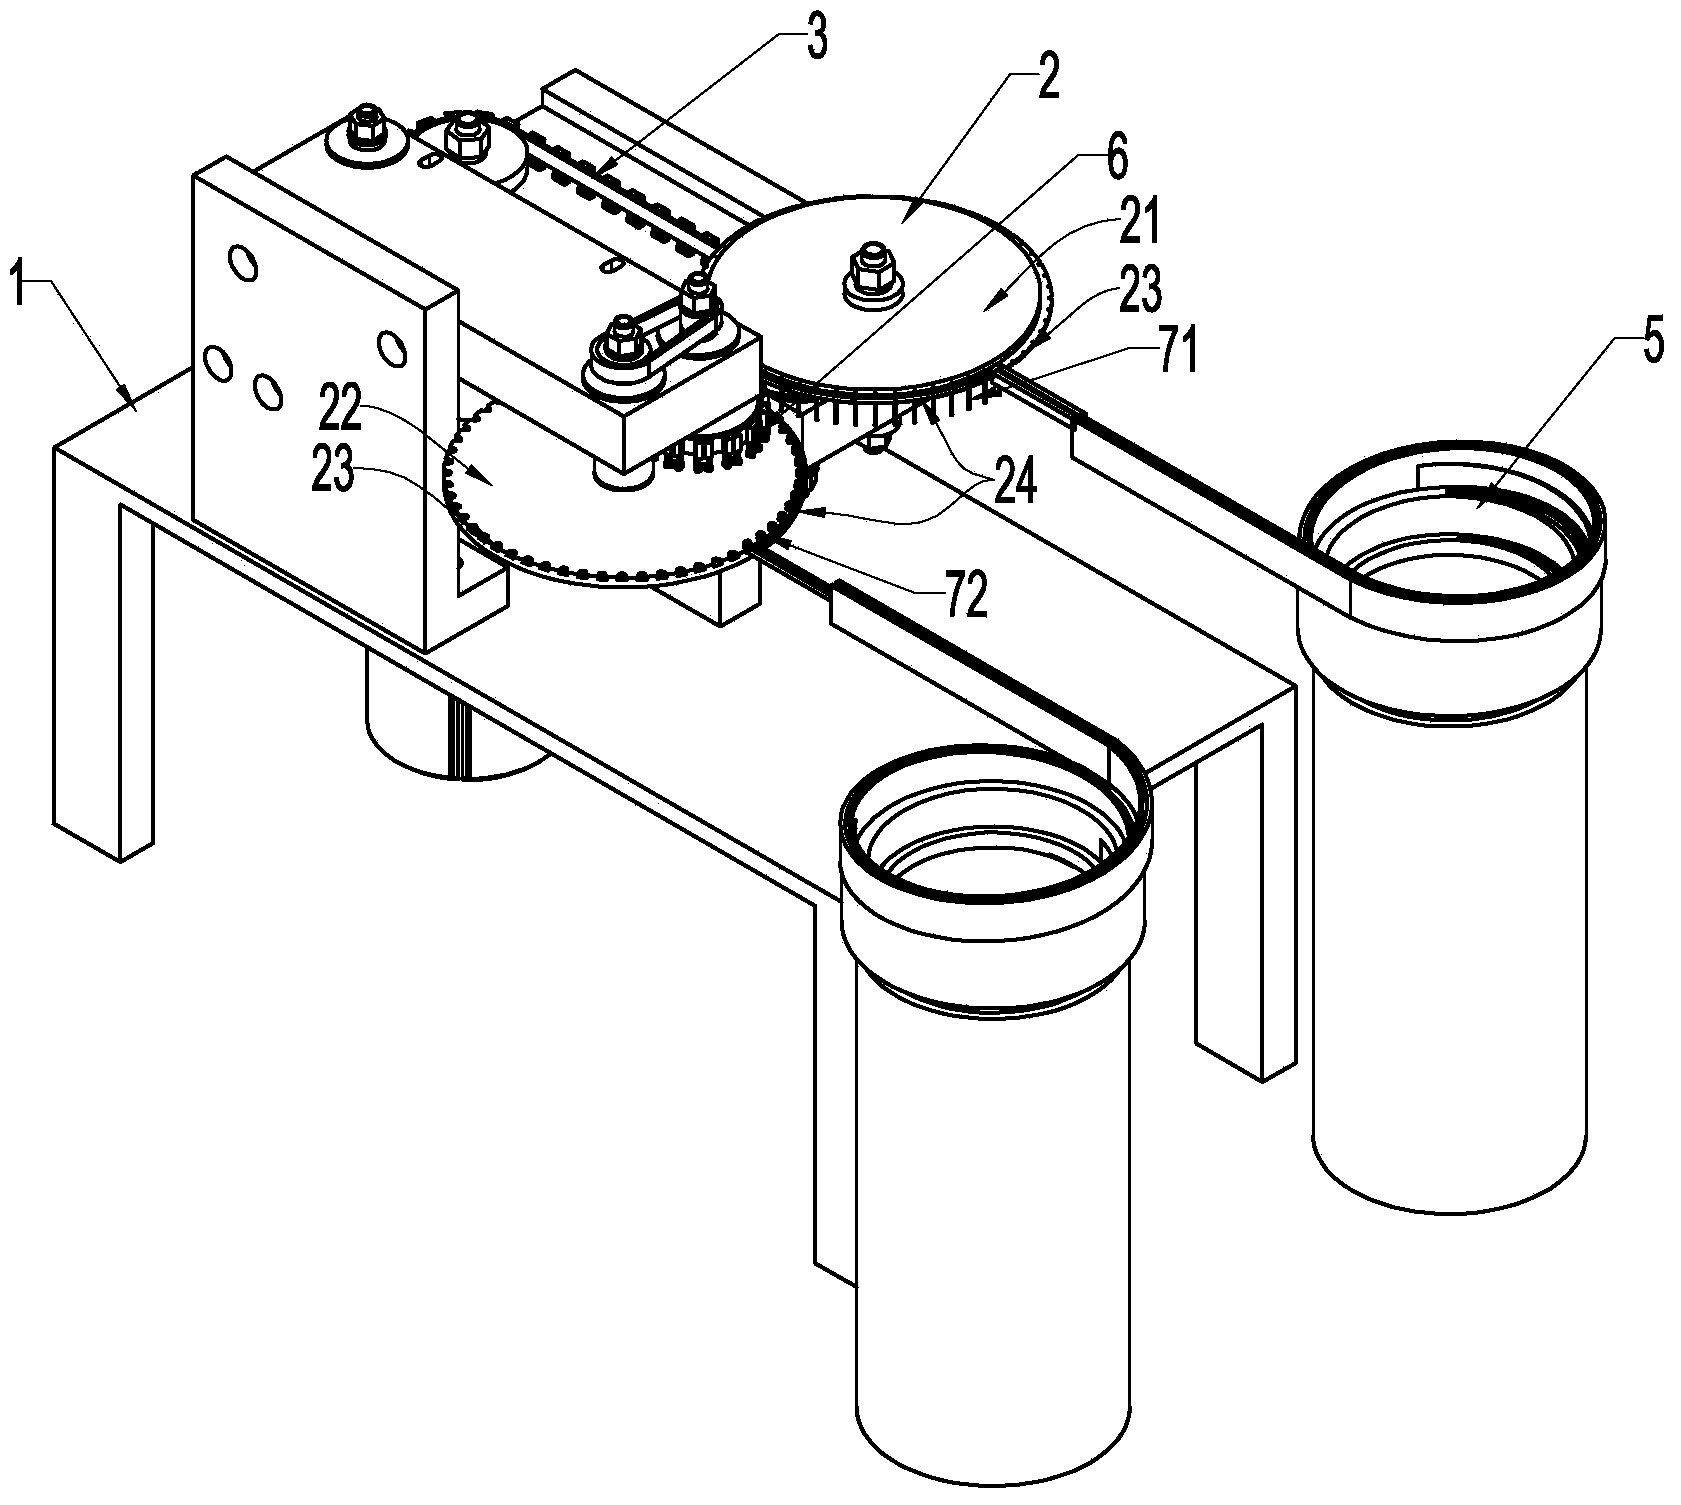 Automatic assembly device for watch winding stem assembly